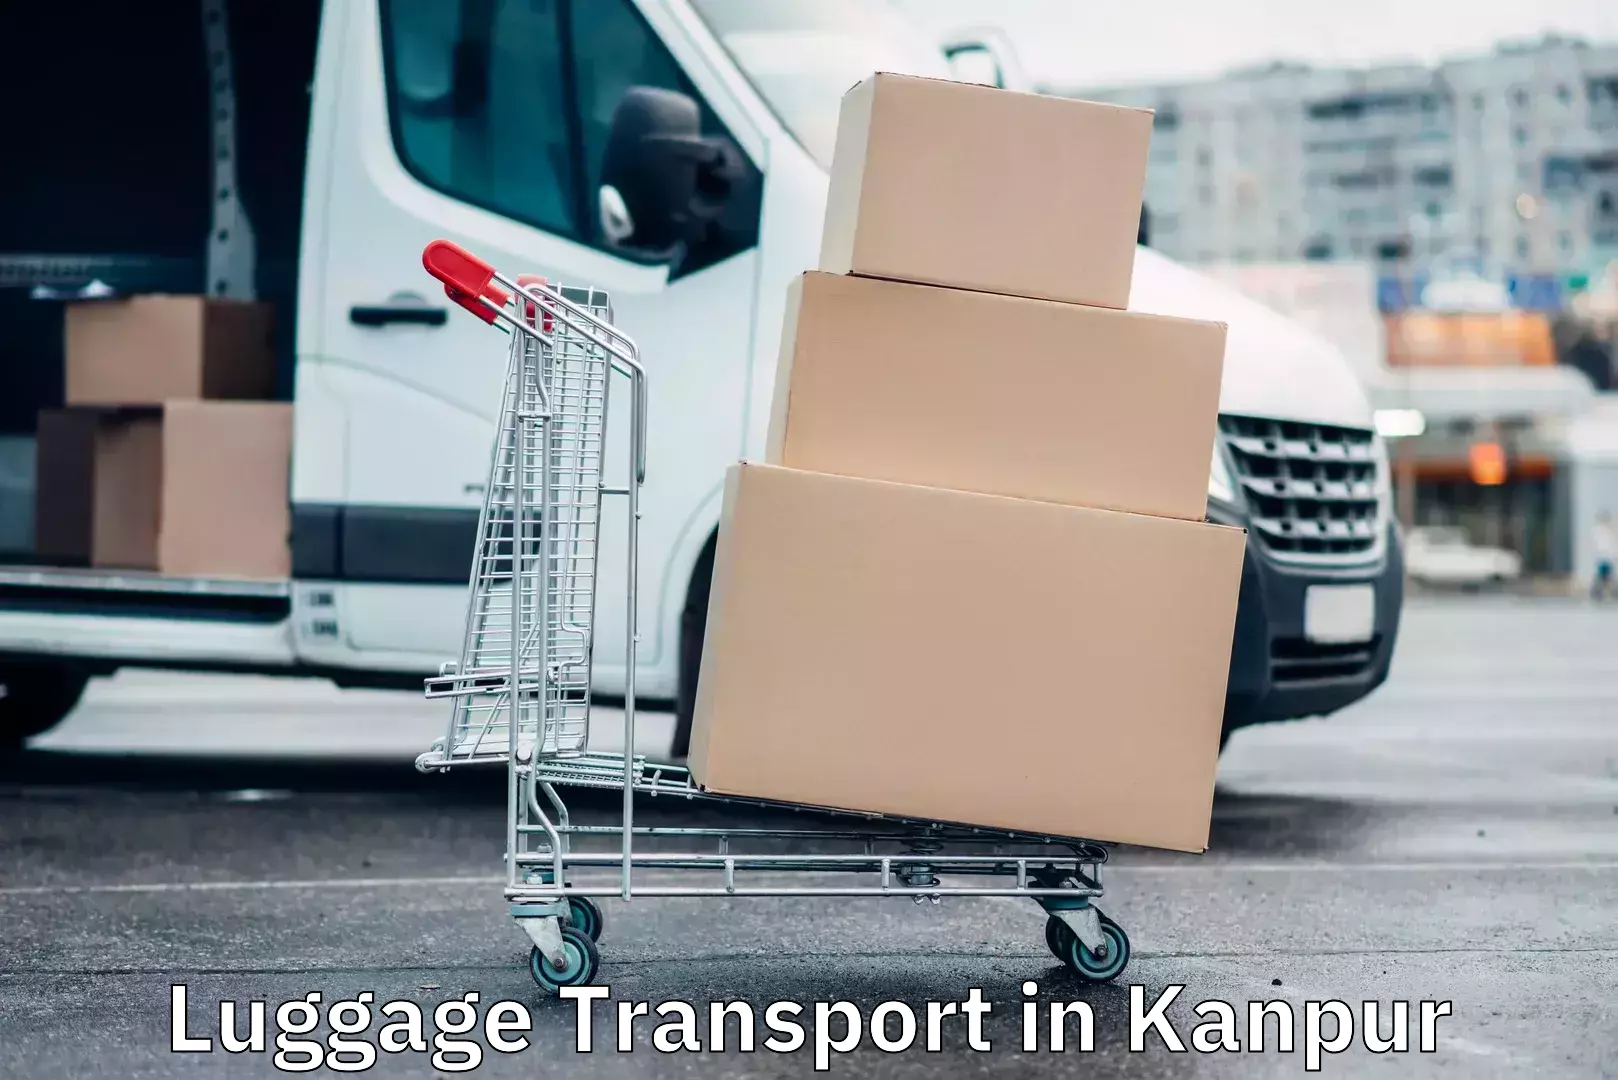 Luggage shipping rates in Kanpur